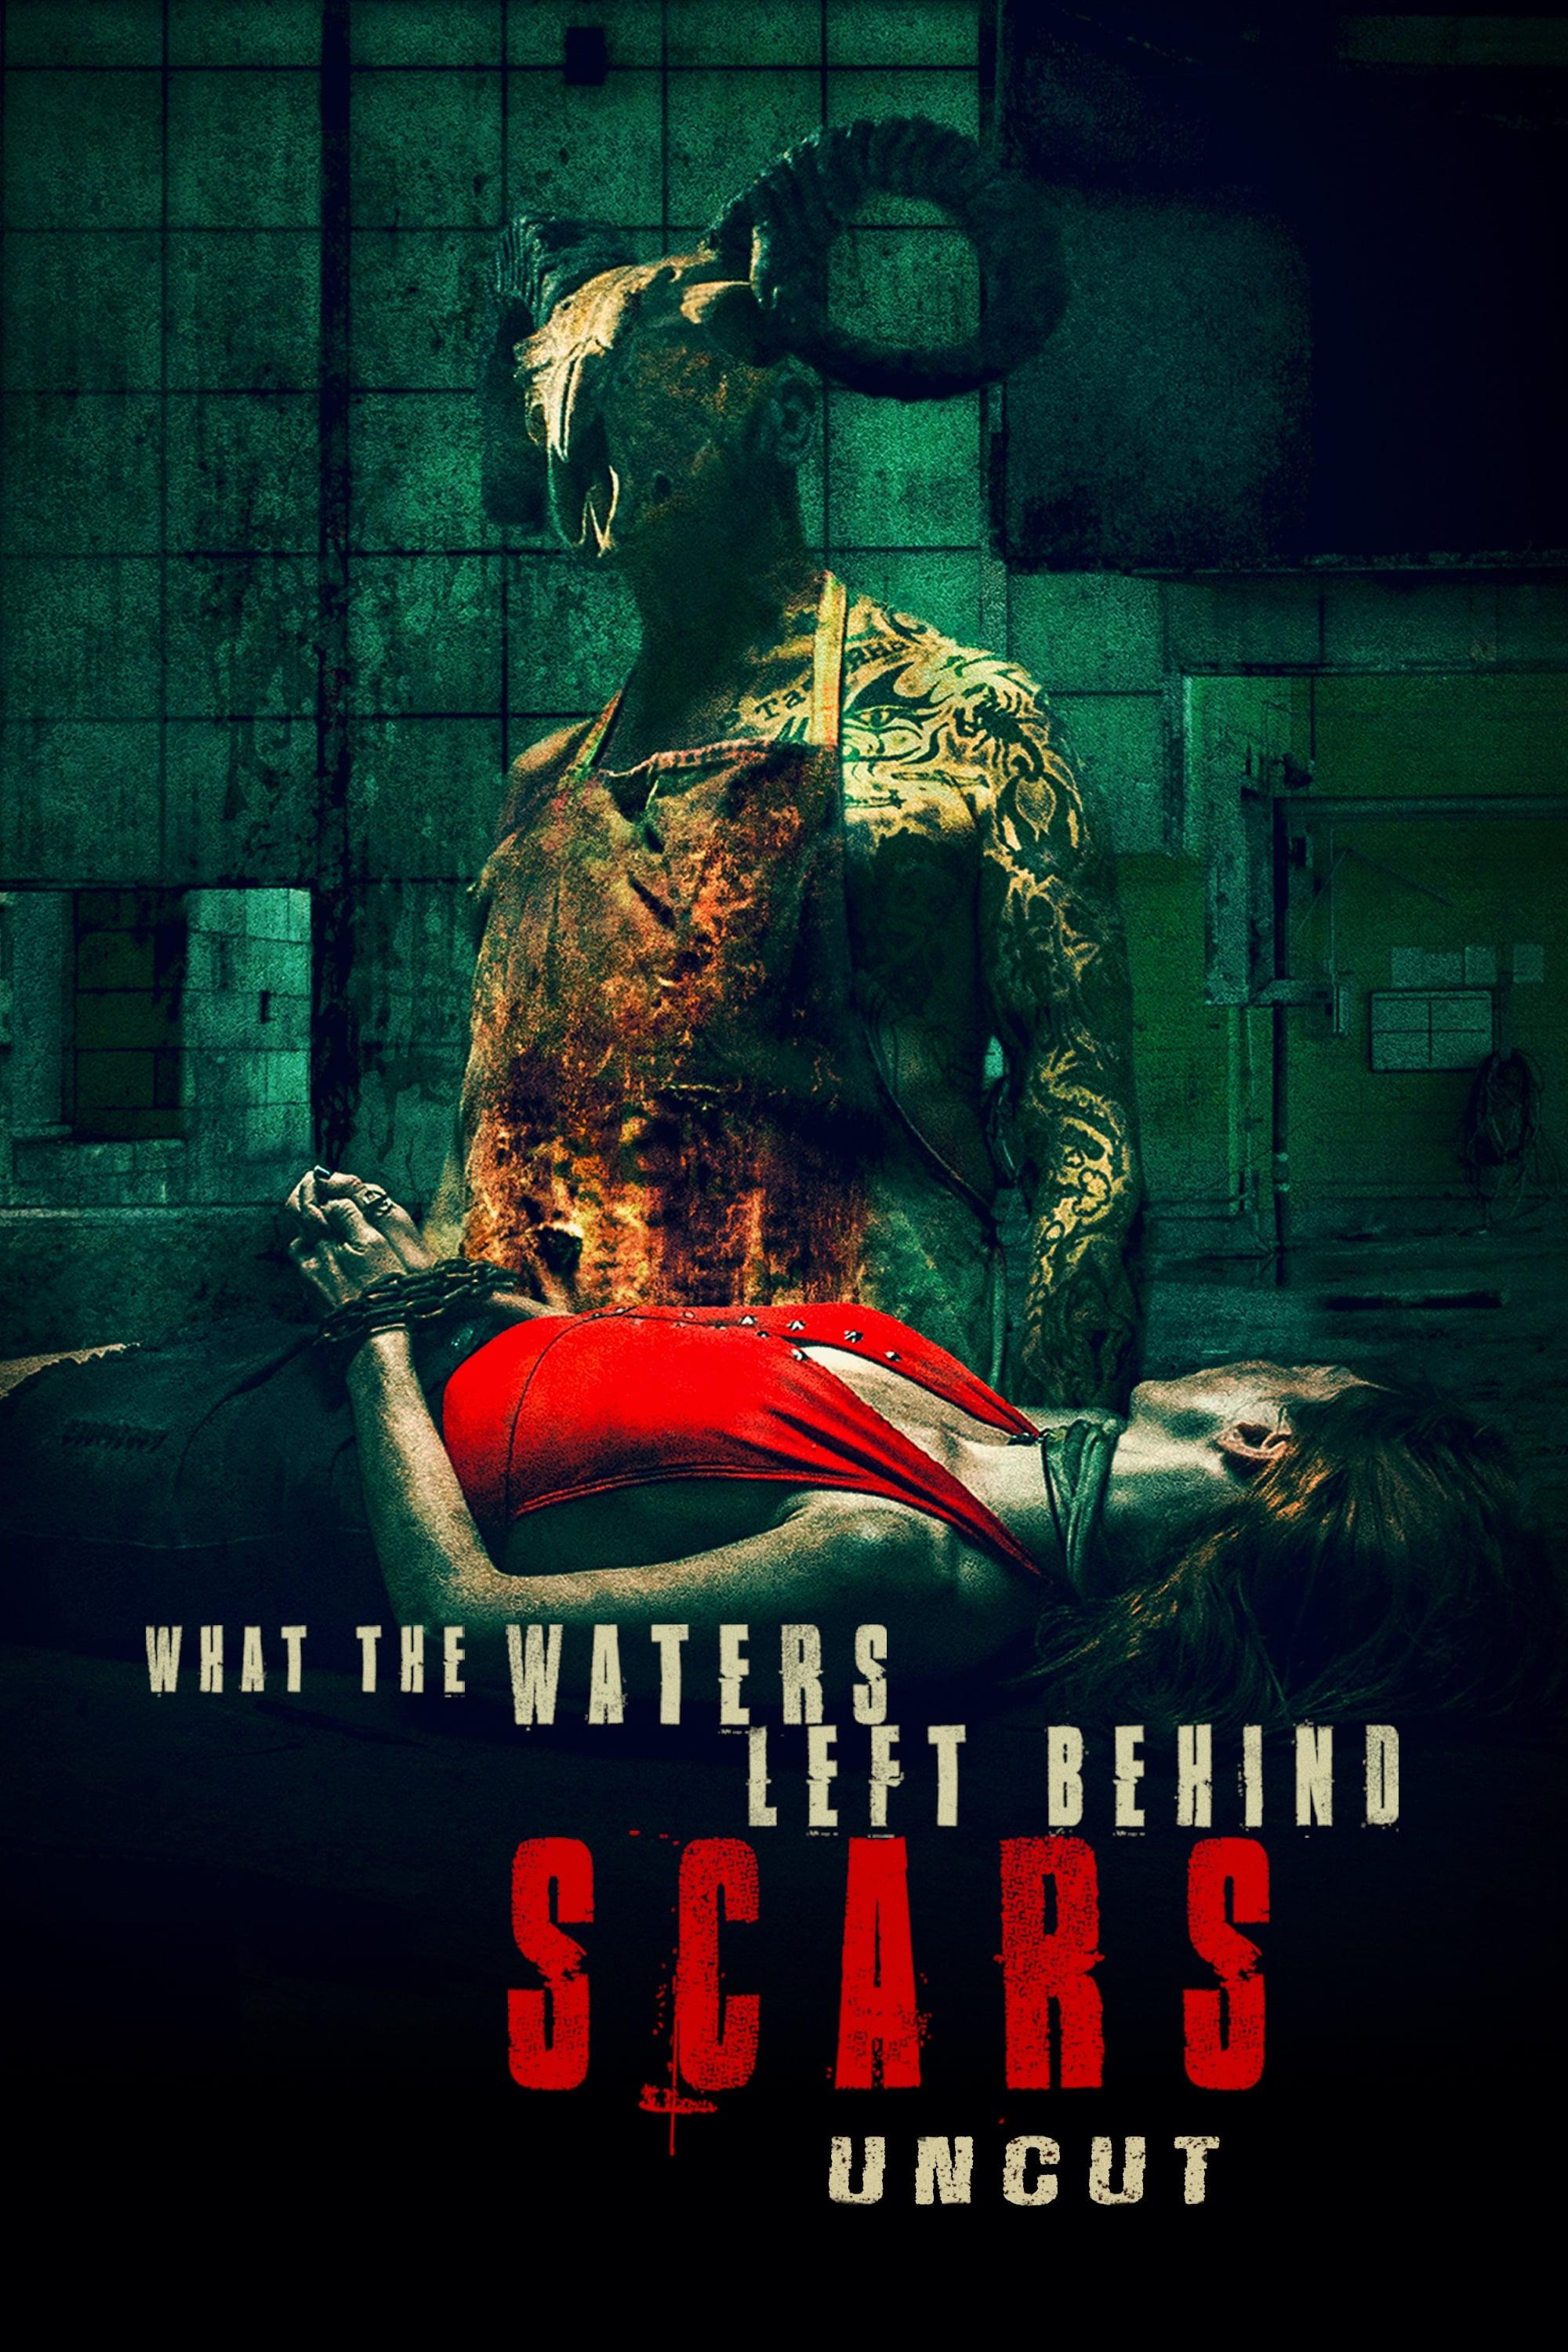 What the Waters Left Behind: Scars poster